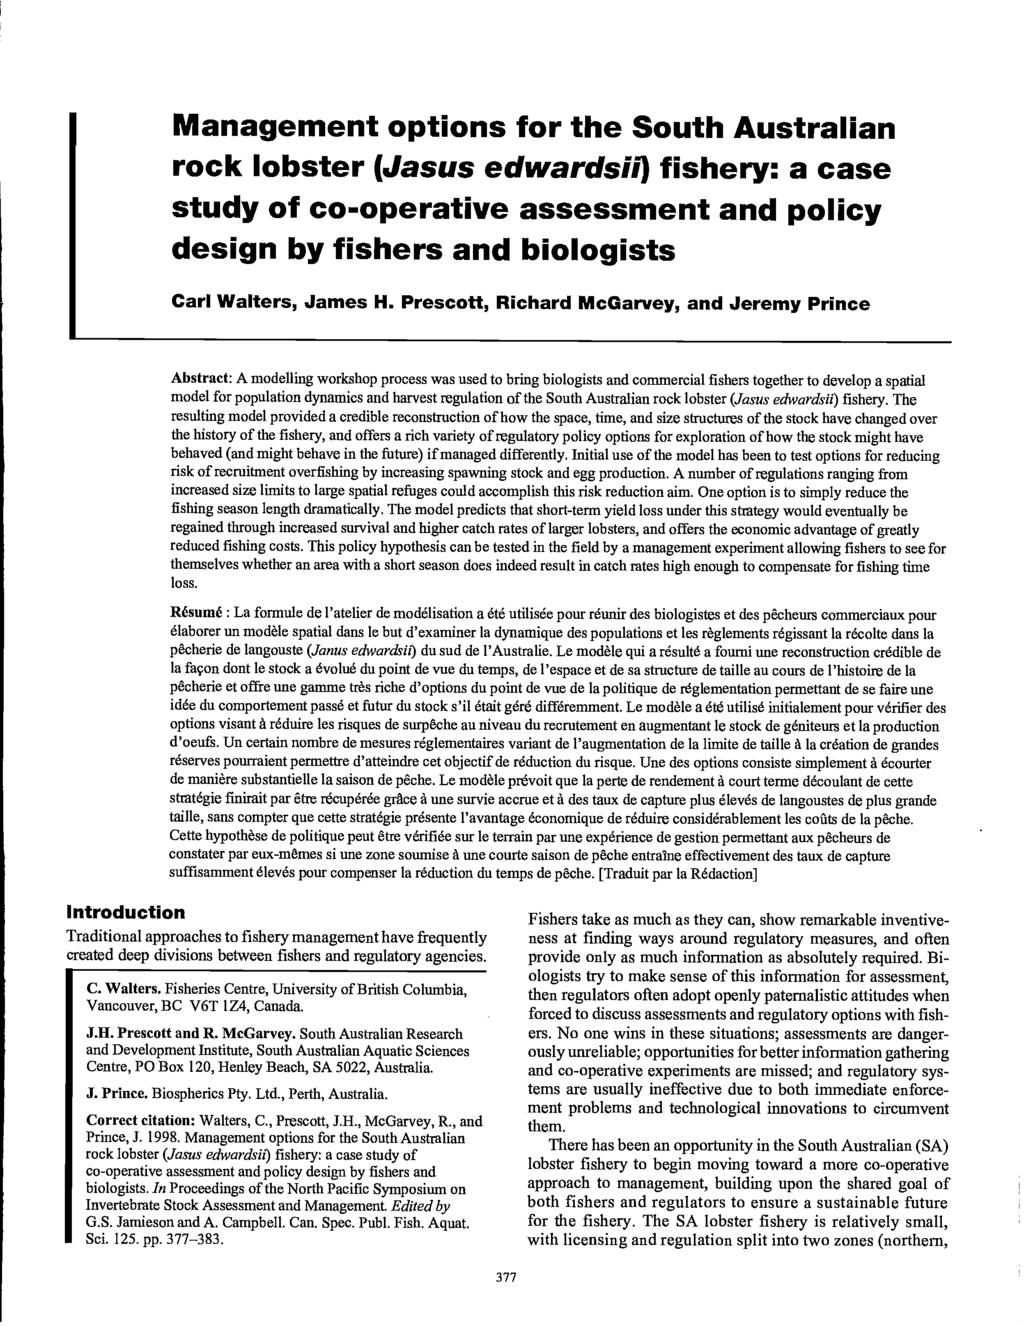 Management options for the South Australian rok lobster (Jasus edwardsii) fishery: a ase study of o-operative assessment and poliy design by fishers and biologists Carl Walters, James H.